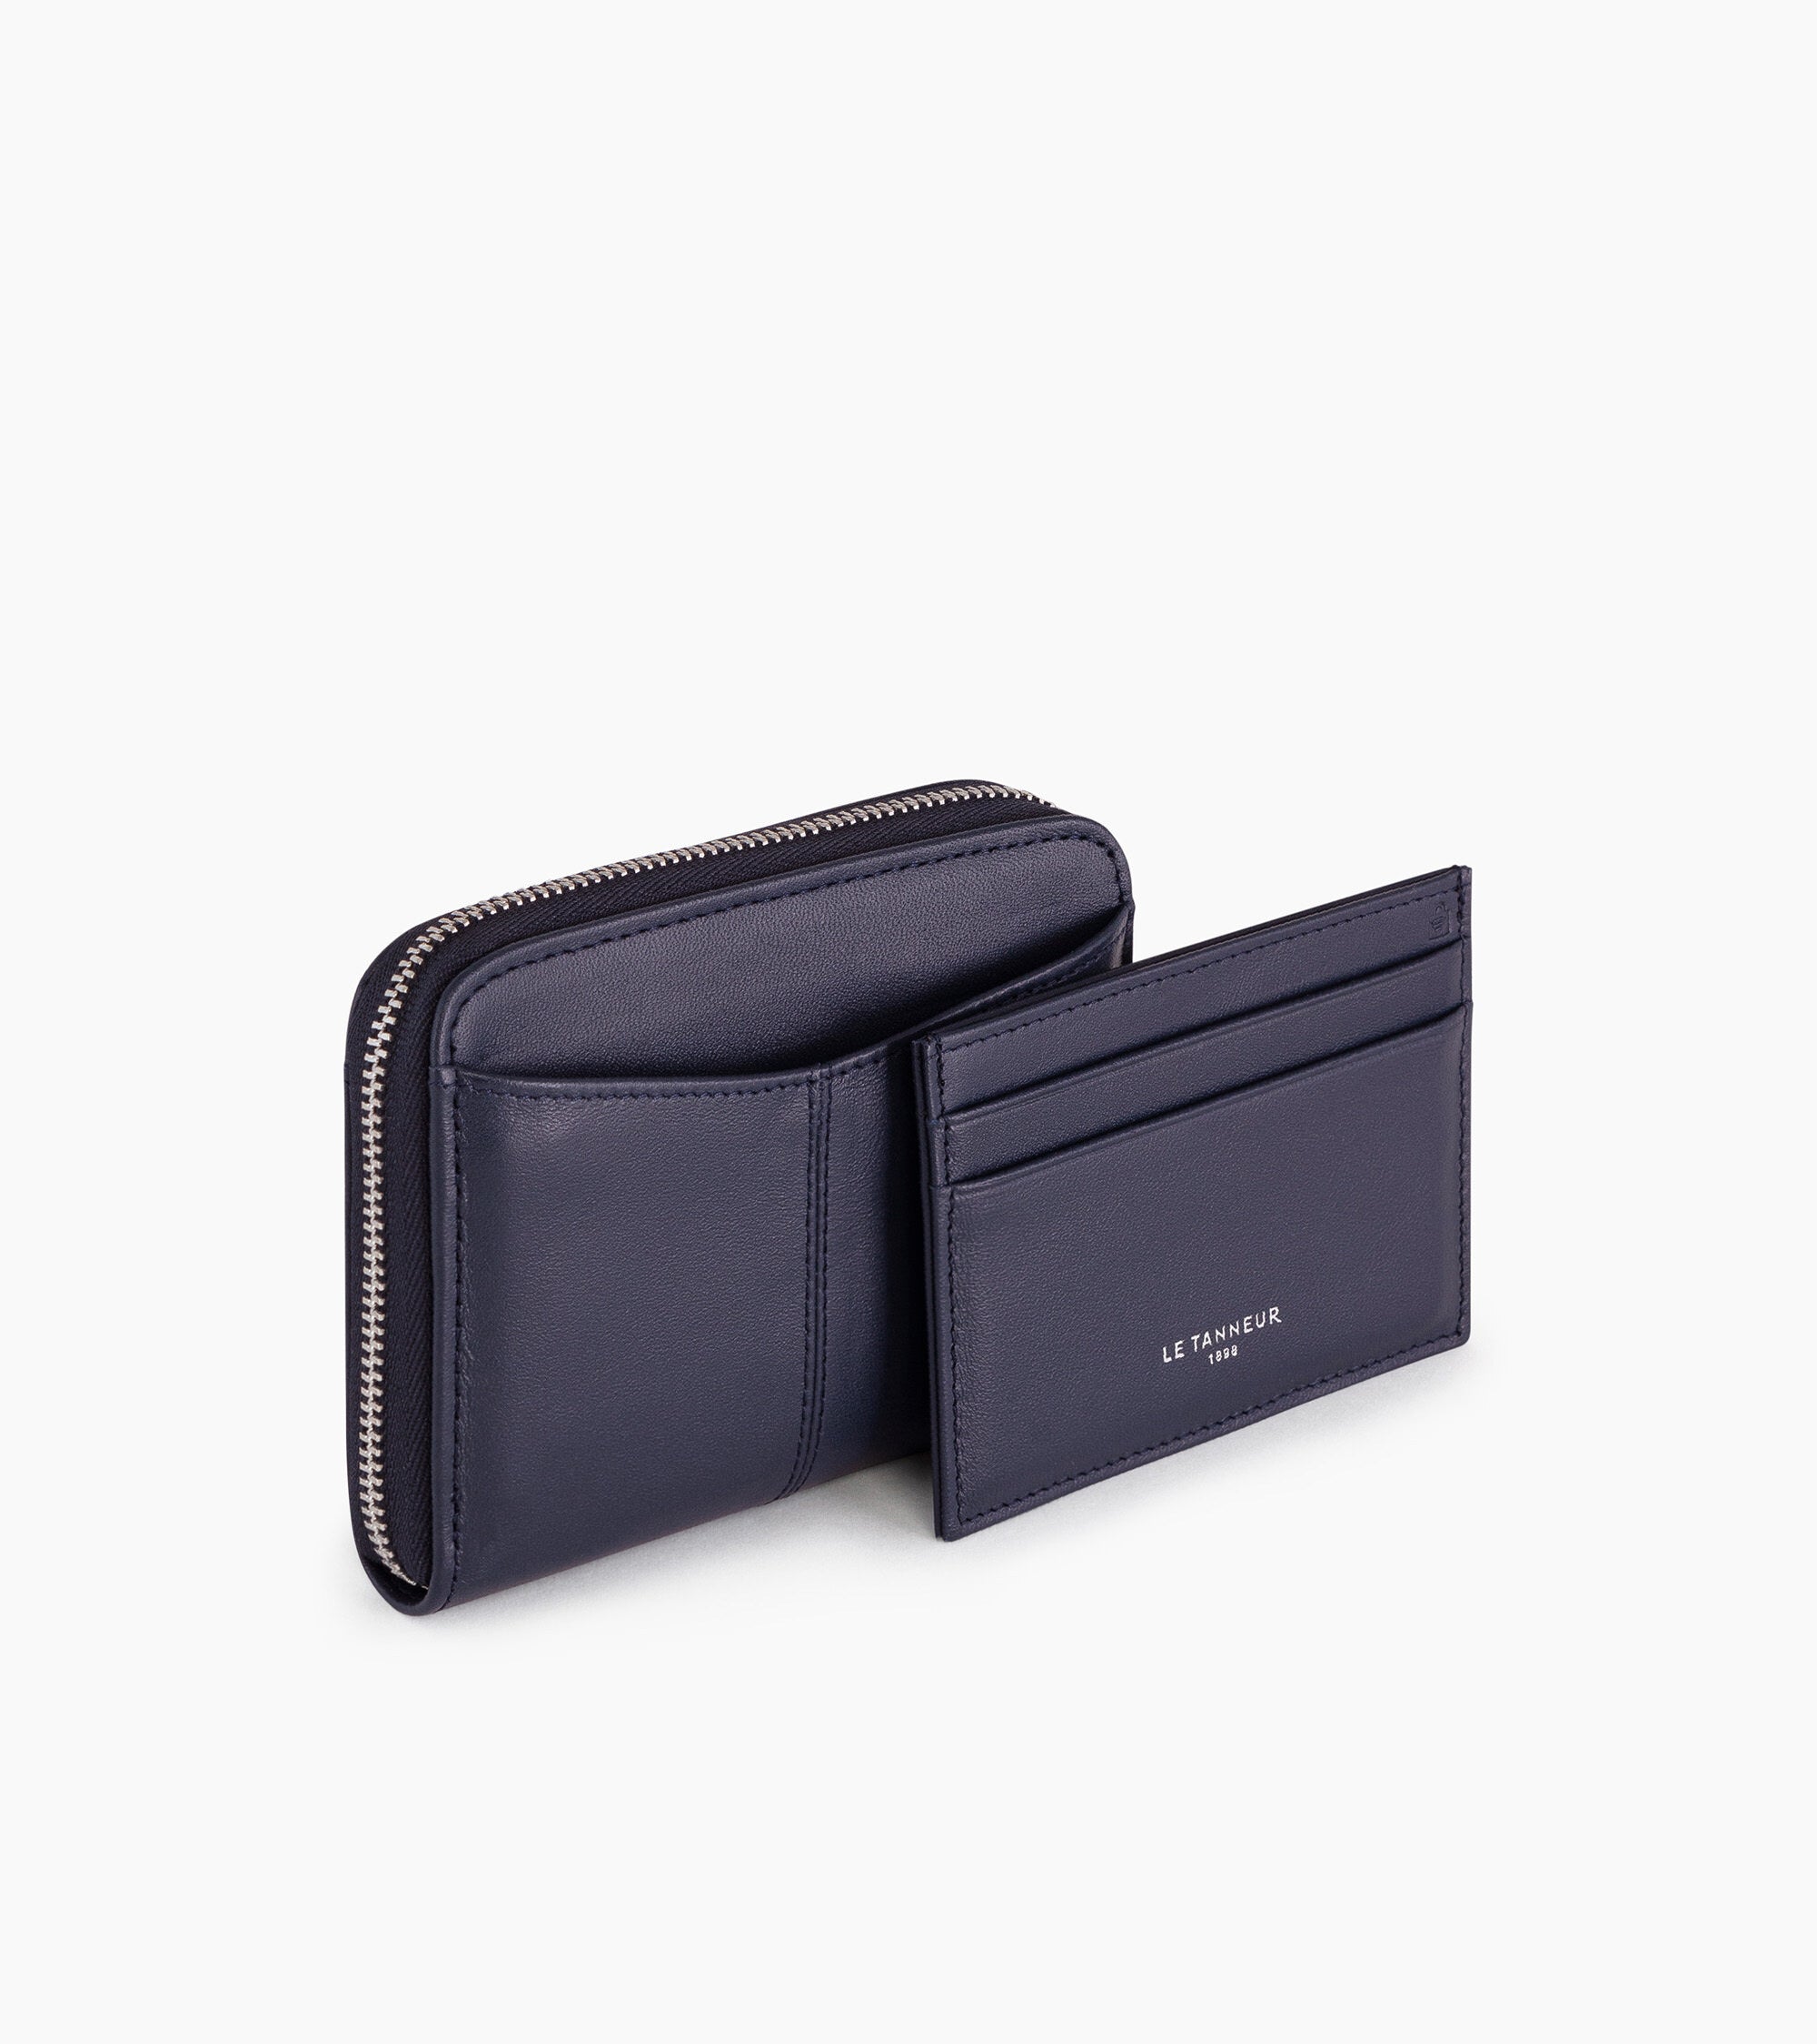 Charlotte zipped coin purse with removable card compartments in smooth leather